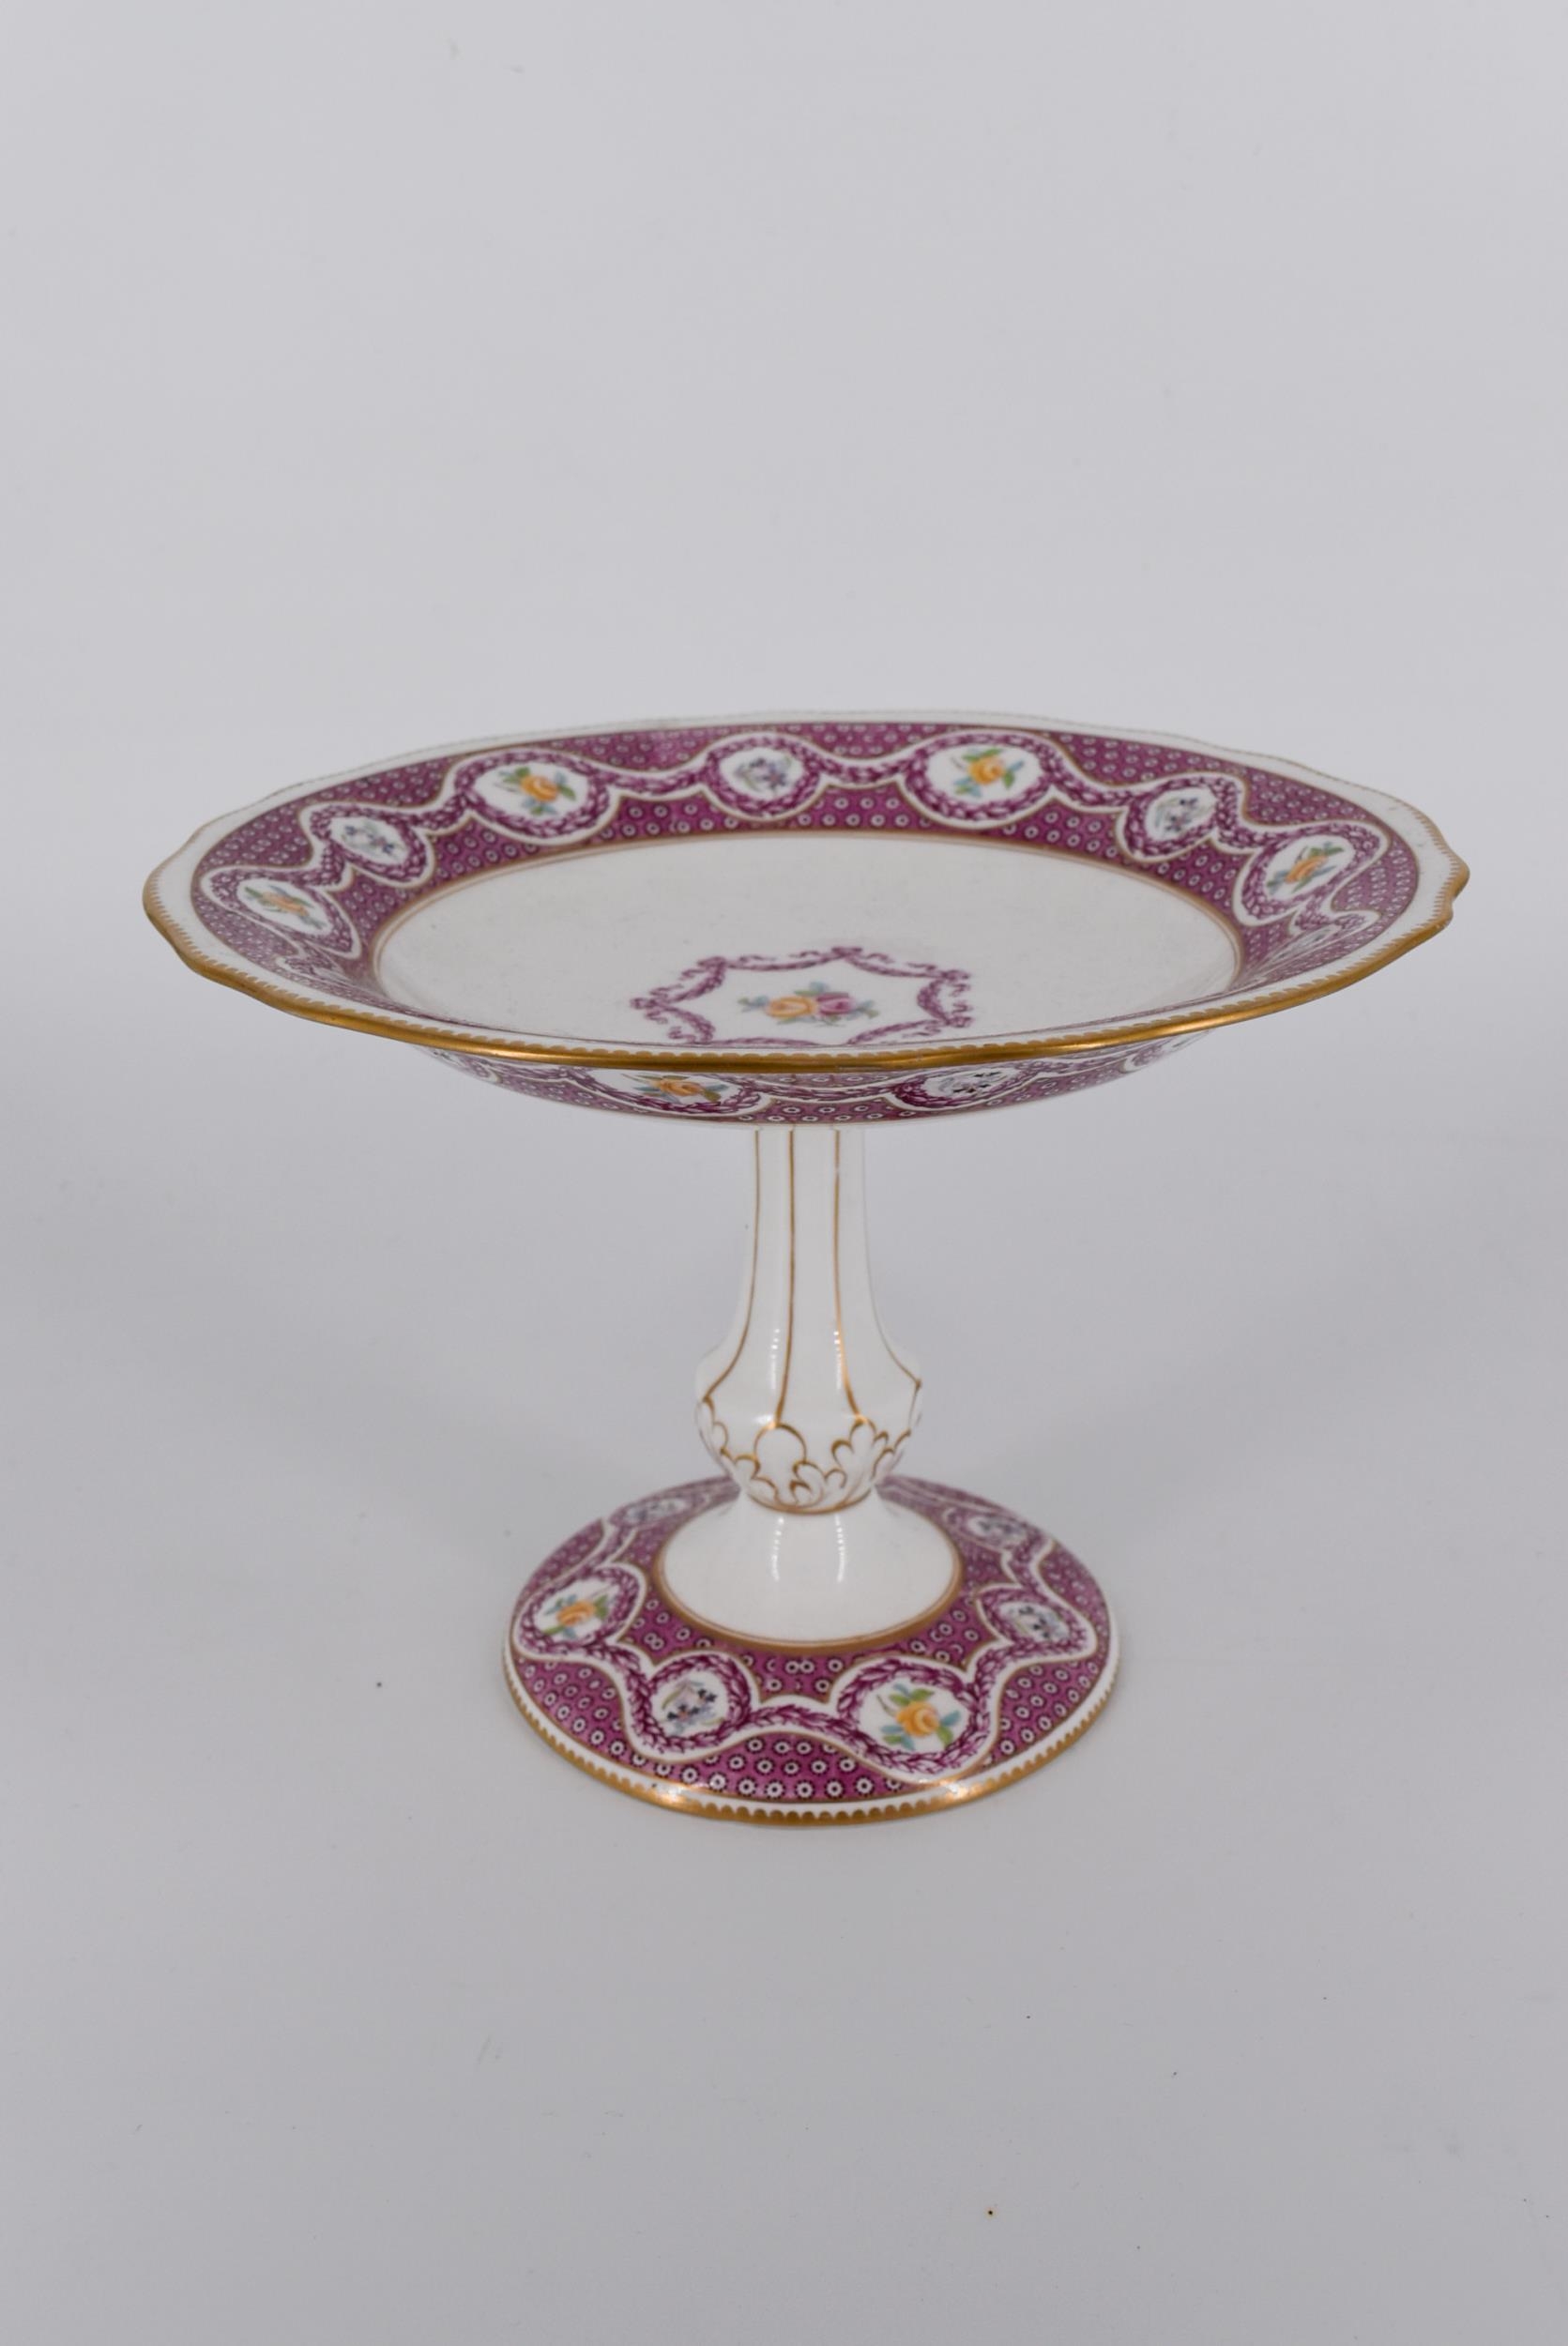 A 20th century Chinese porcelain bowl with dragon decoration along with a rose design and gilded - Image 5 of 7